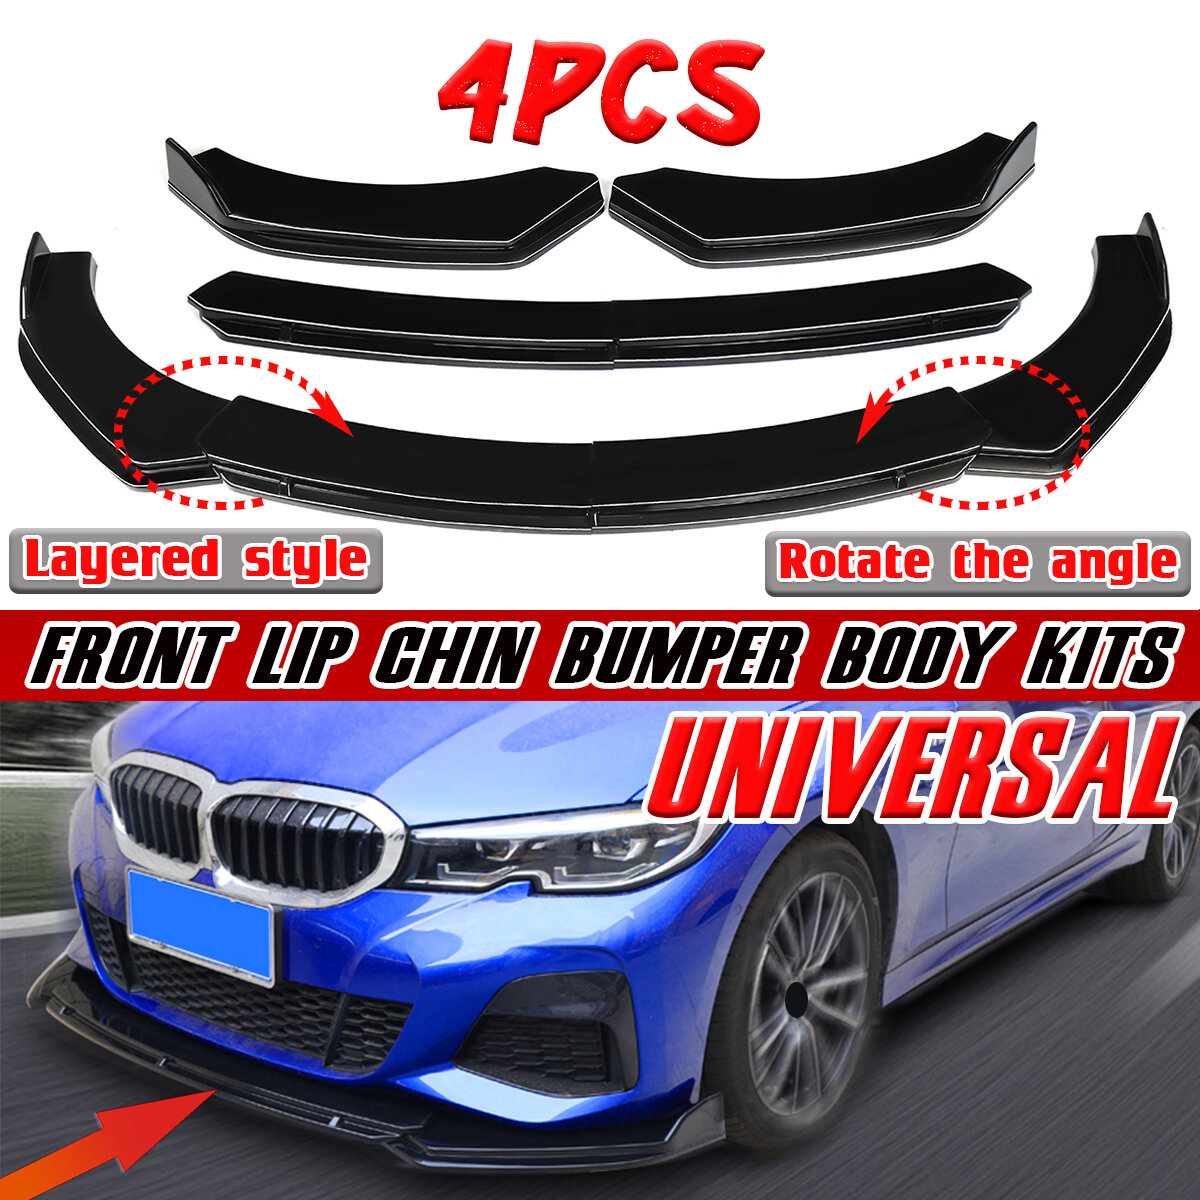 Image of For Car Universal Glossy Black Front Lip Chin Bumper Body Kits New